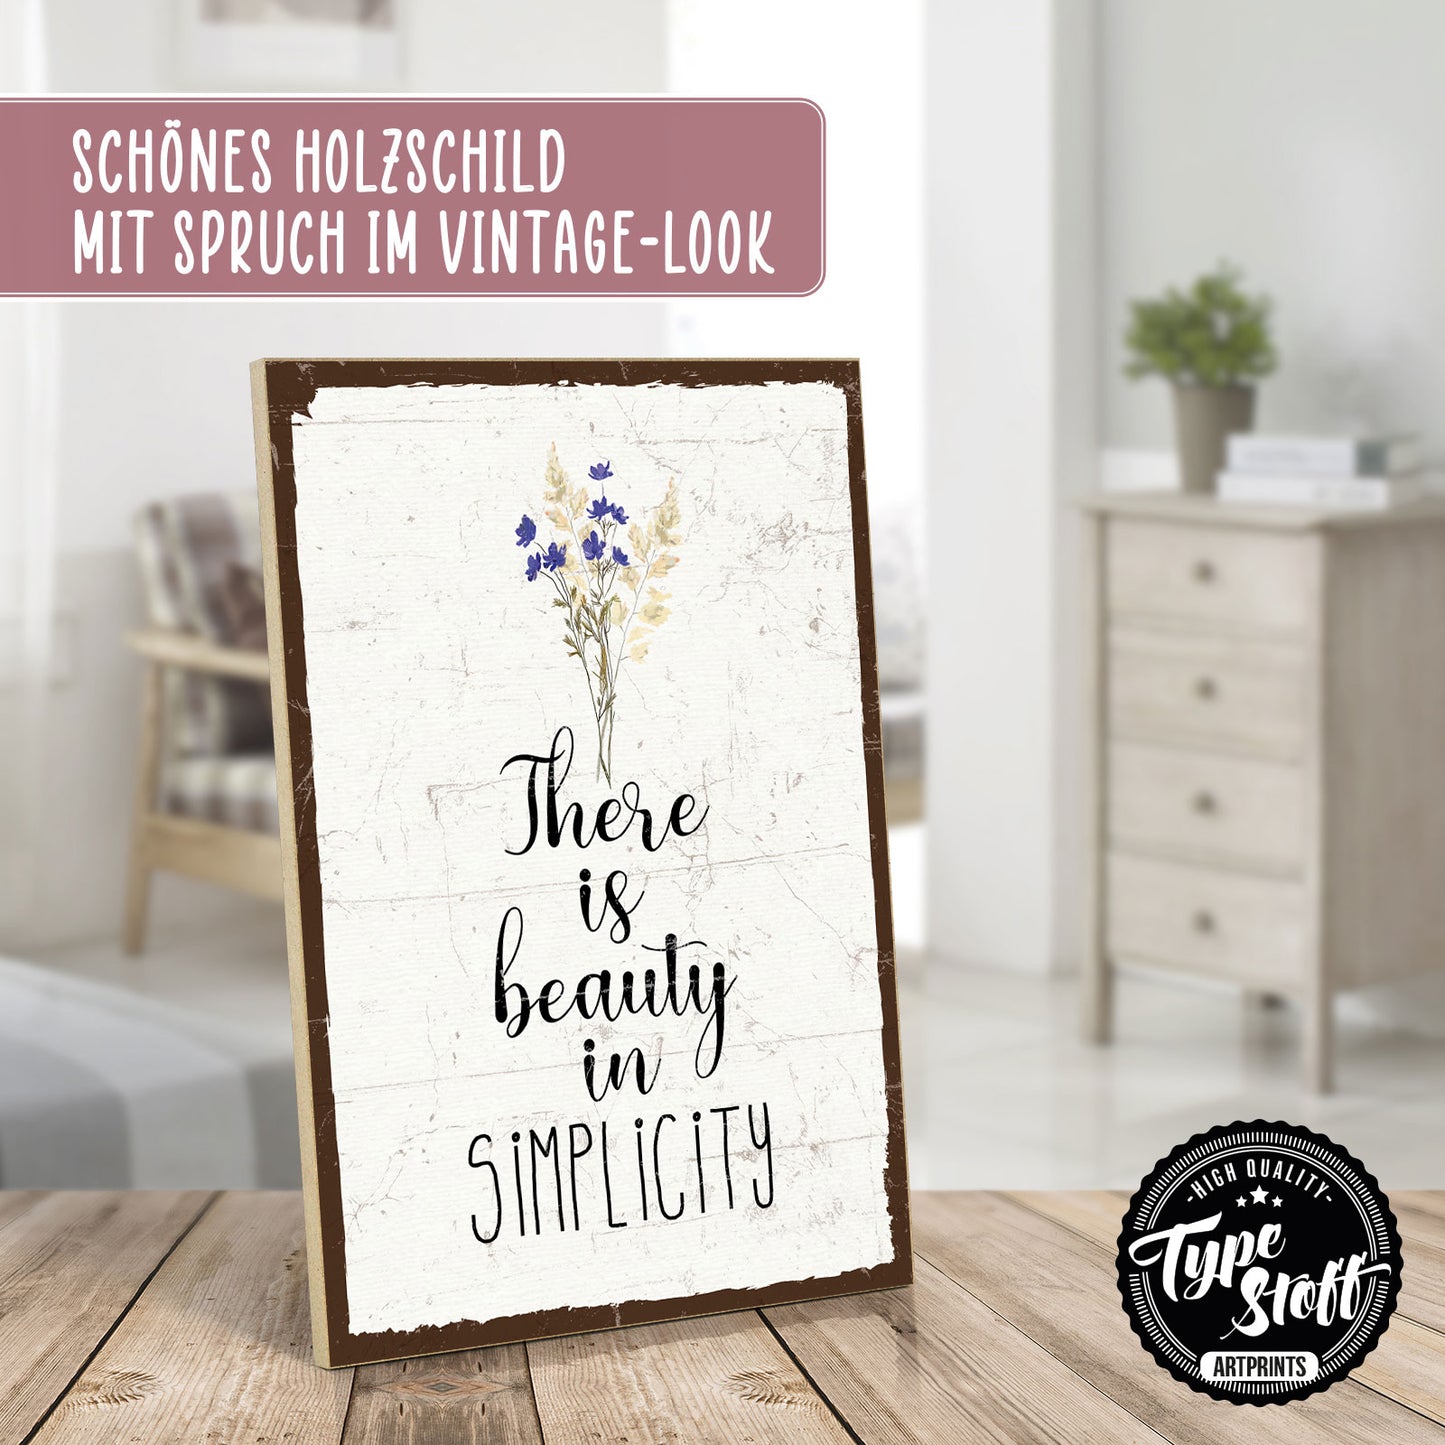 Holzschild mit Spruch - Hygge - Beauty in simplicity – HS-GH-01214